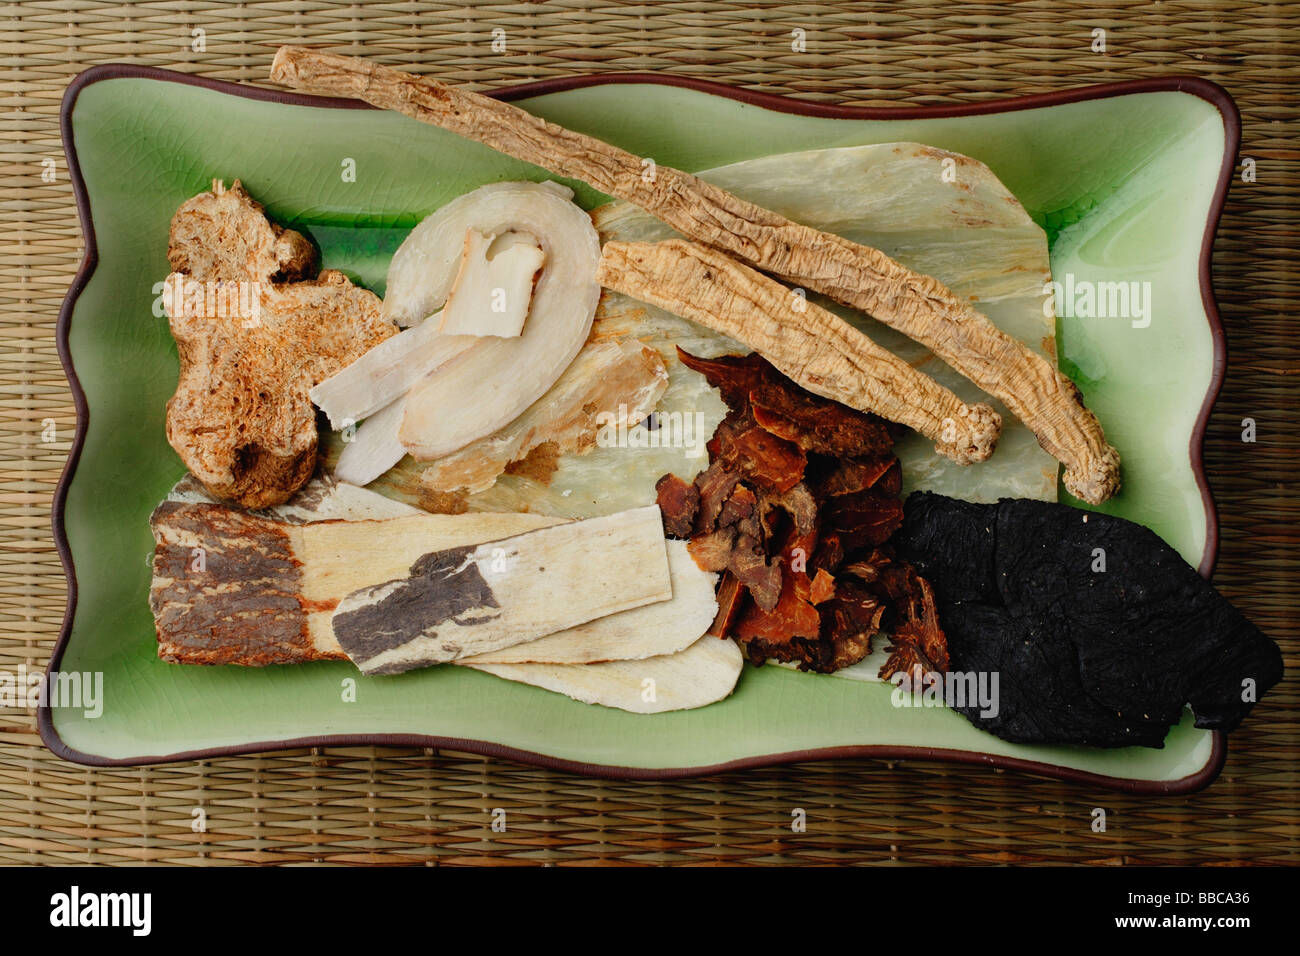 Plate of Chinese medicinal herbs, close-up Stock Photo